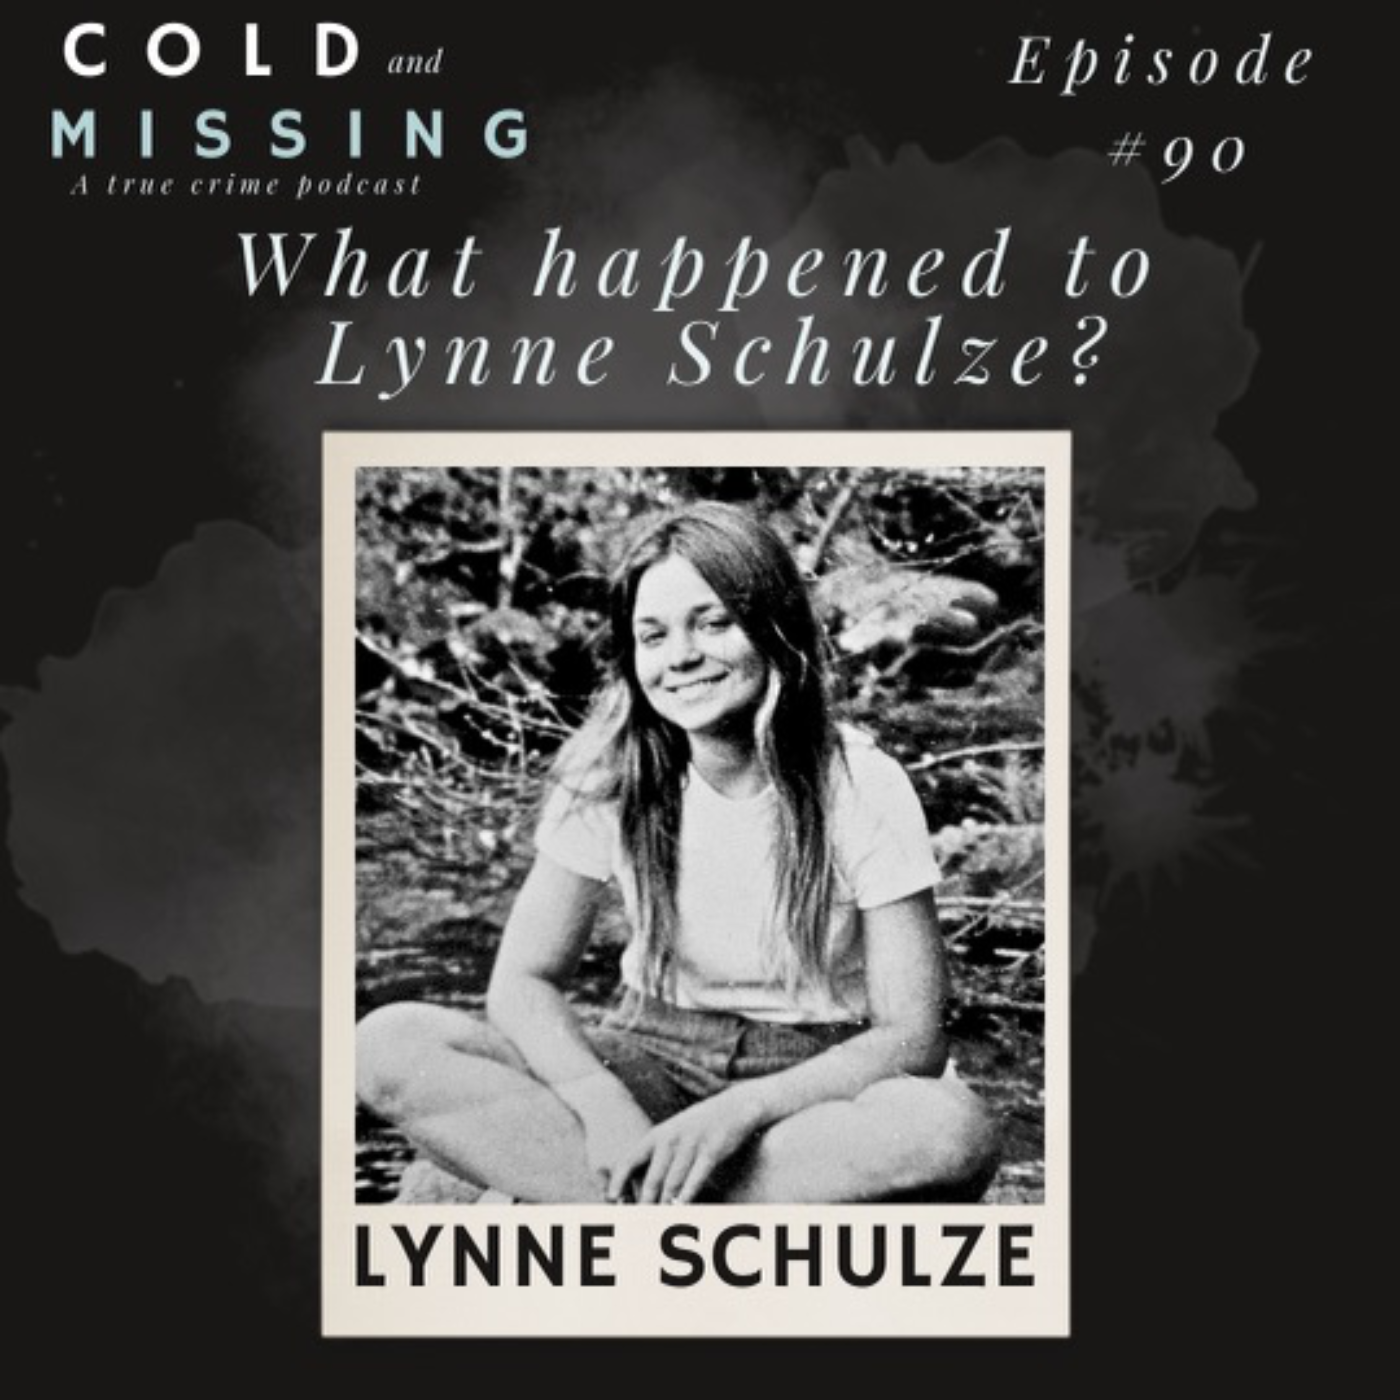 Cold and Missing: Lynne Schulze